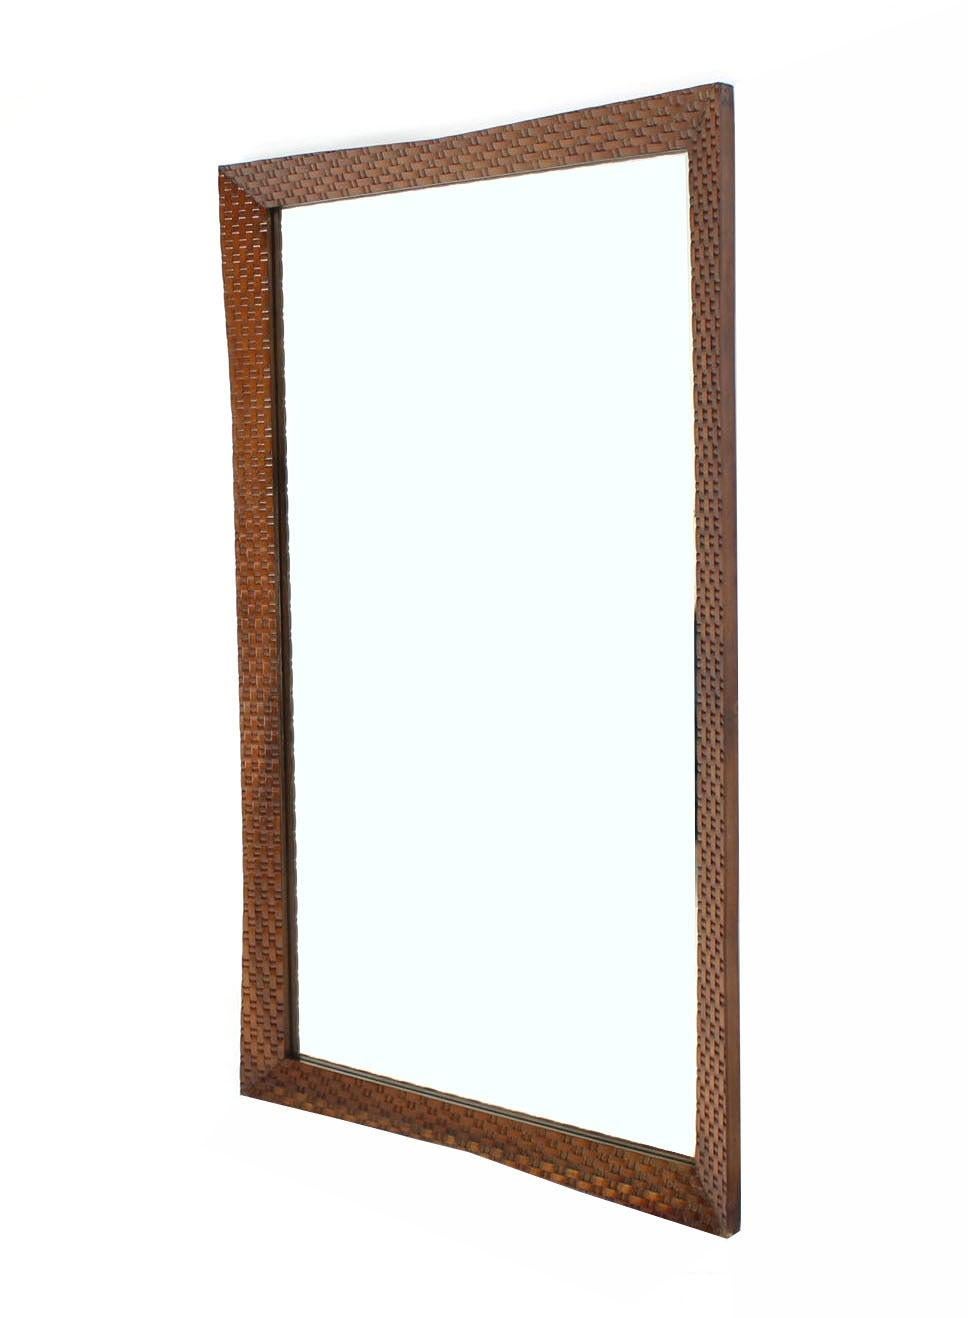 Mid-Century Modern 1970s Carved Walnut Lattice Basket Weave Pattern Large Rectangle Wall Mirror  For Sale